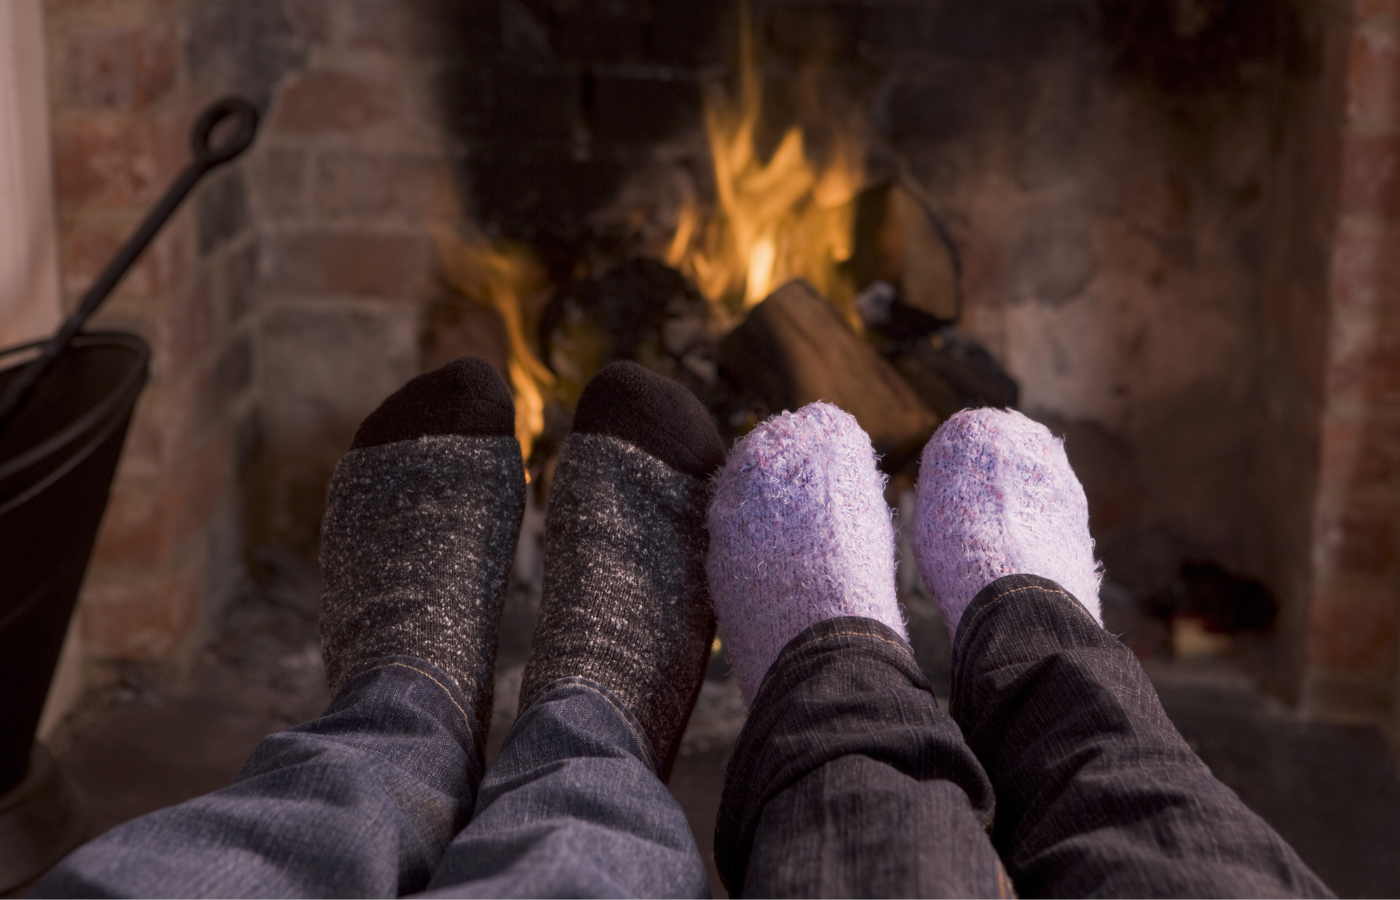 Keeping feet warm with fire and underfloor insulation